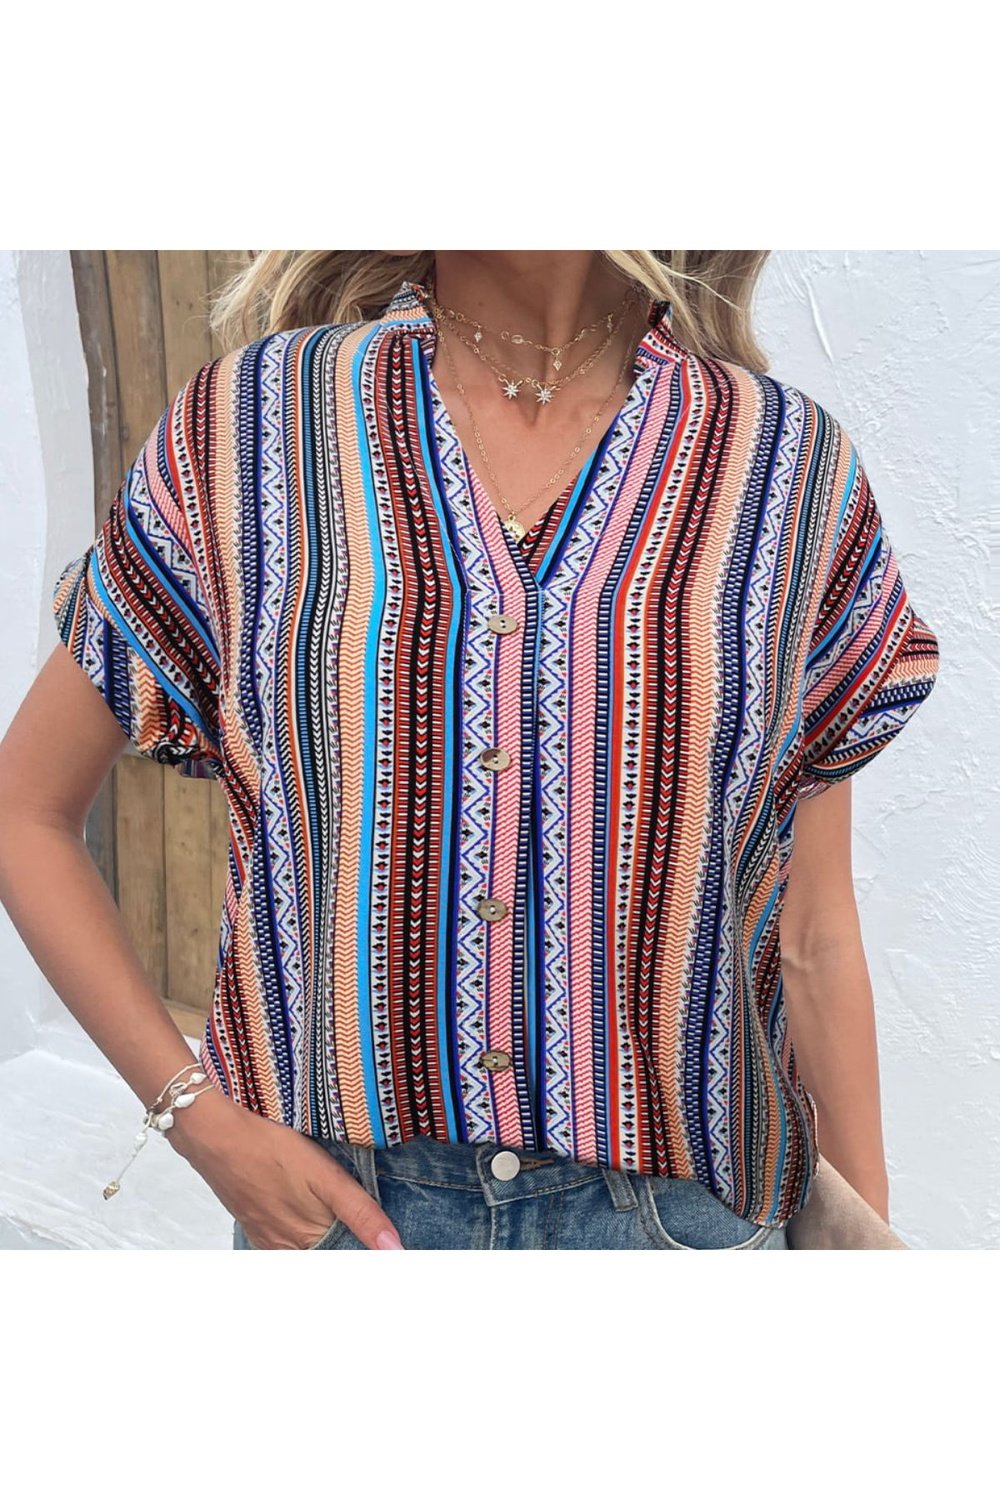 Multicolored Stripe Notched Neck Top - Shirts - FITGGINS